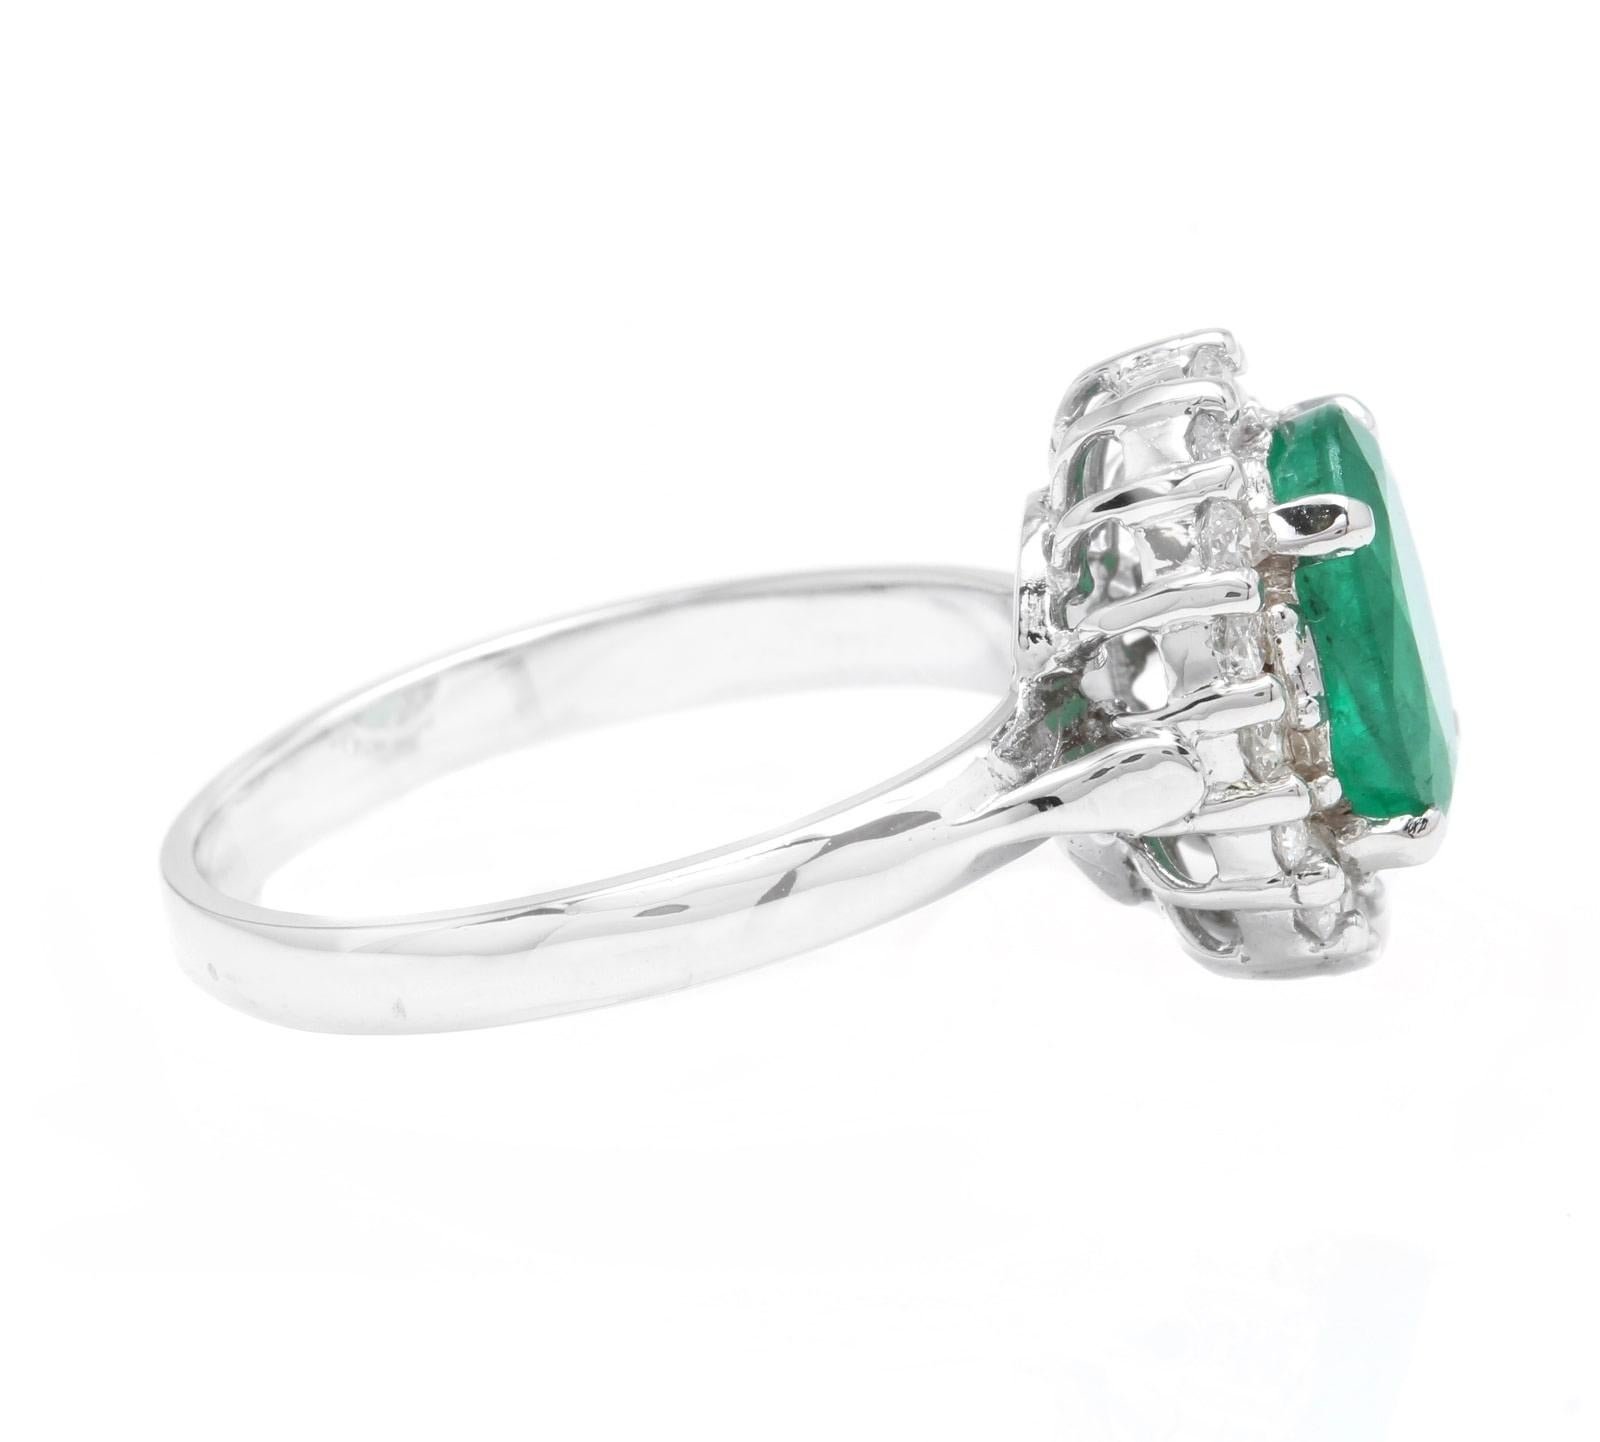 Emerald Cut 3.10 Carat Exquisite Emerald and Diamond 14 Karat Solid White Gold Ring For Sale